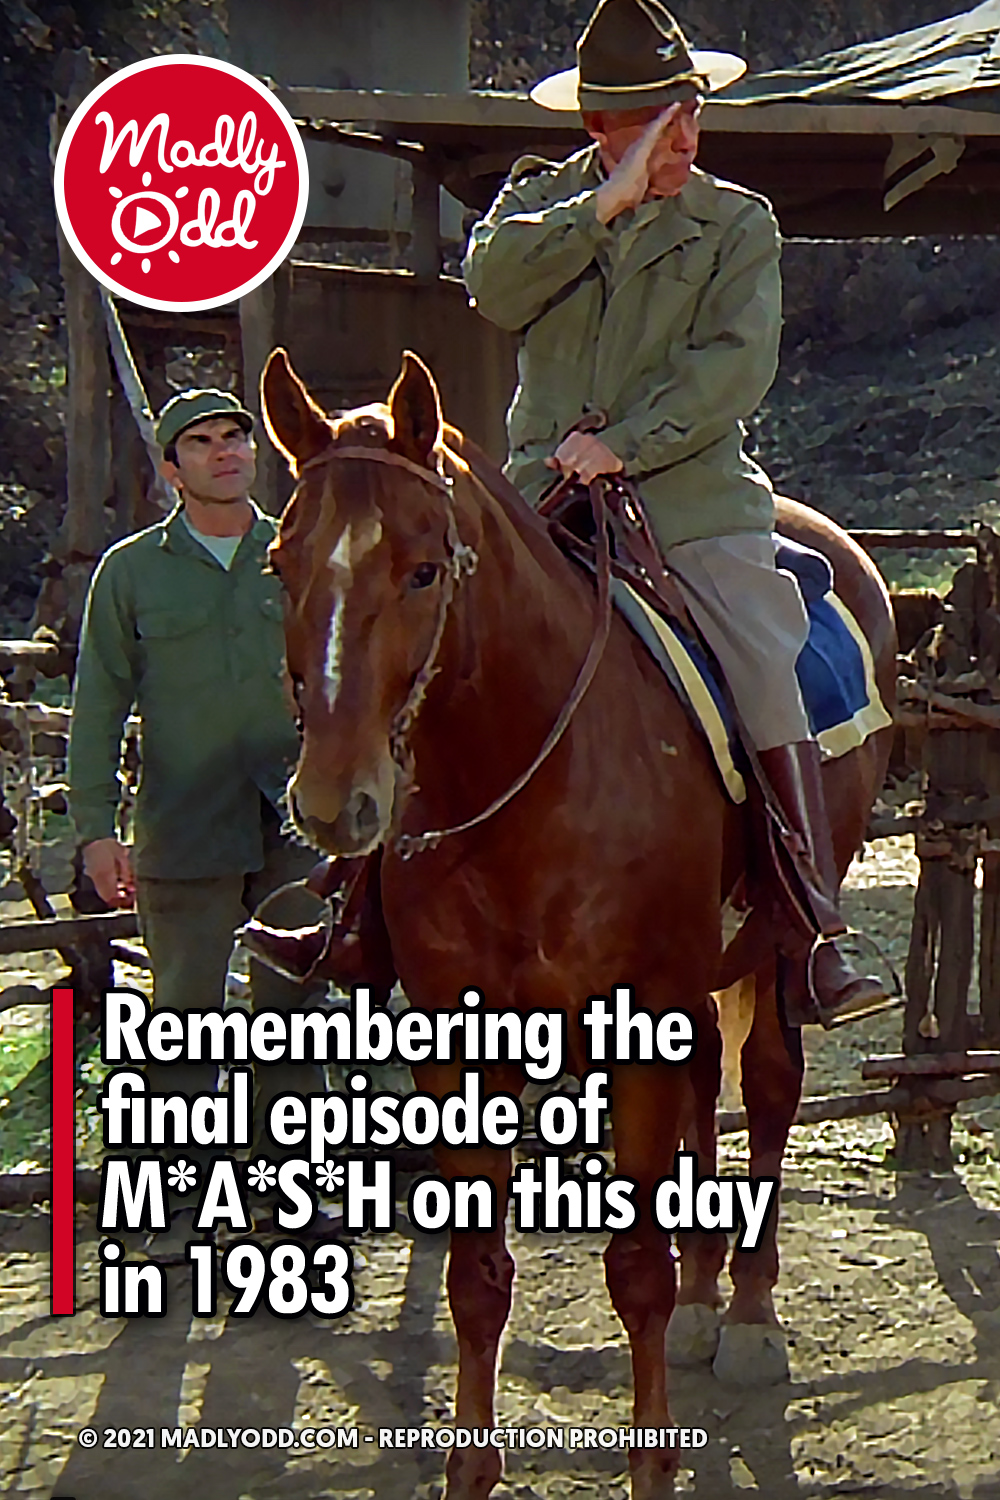 Remembering the final episode of M*A*S*H